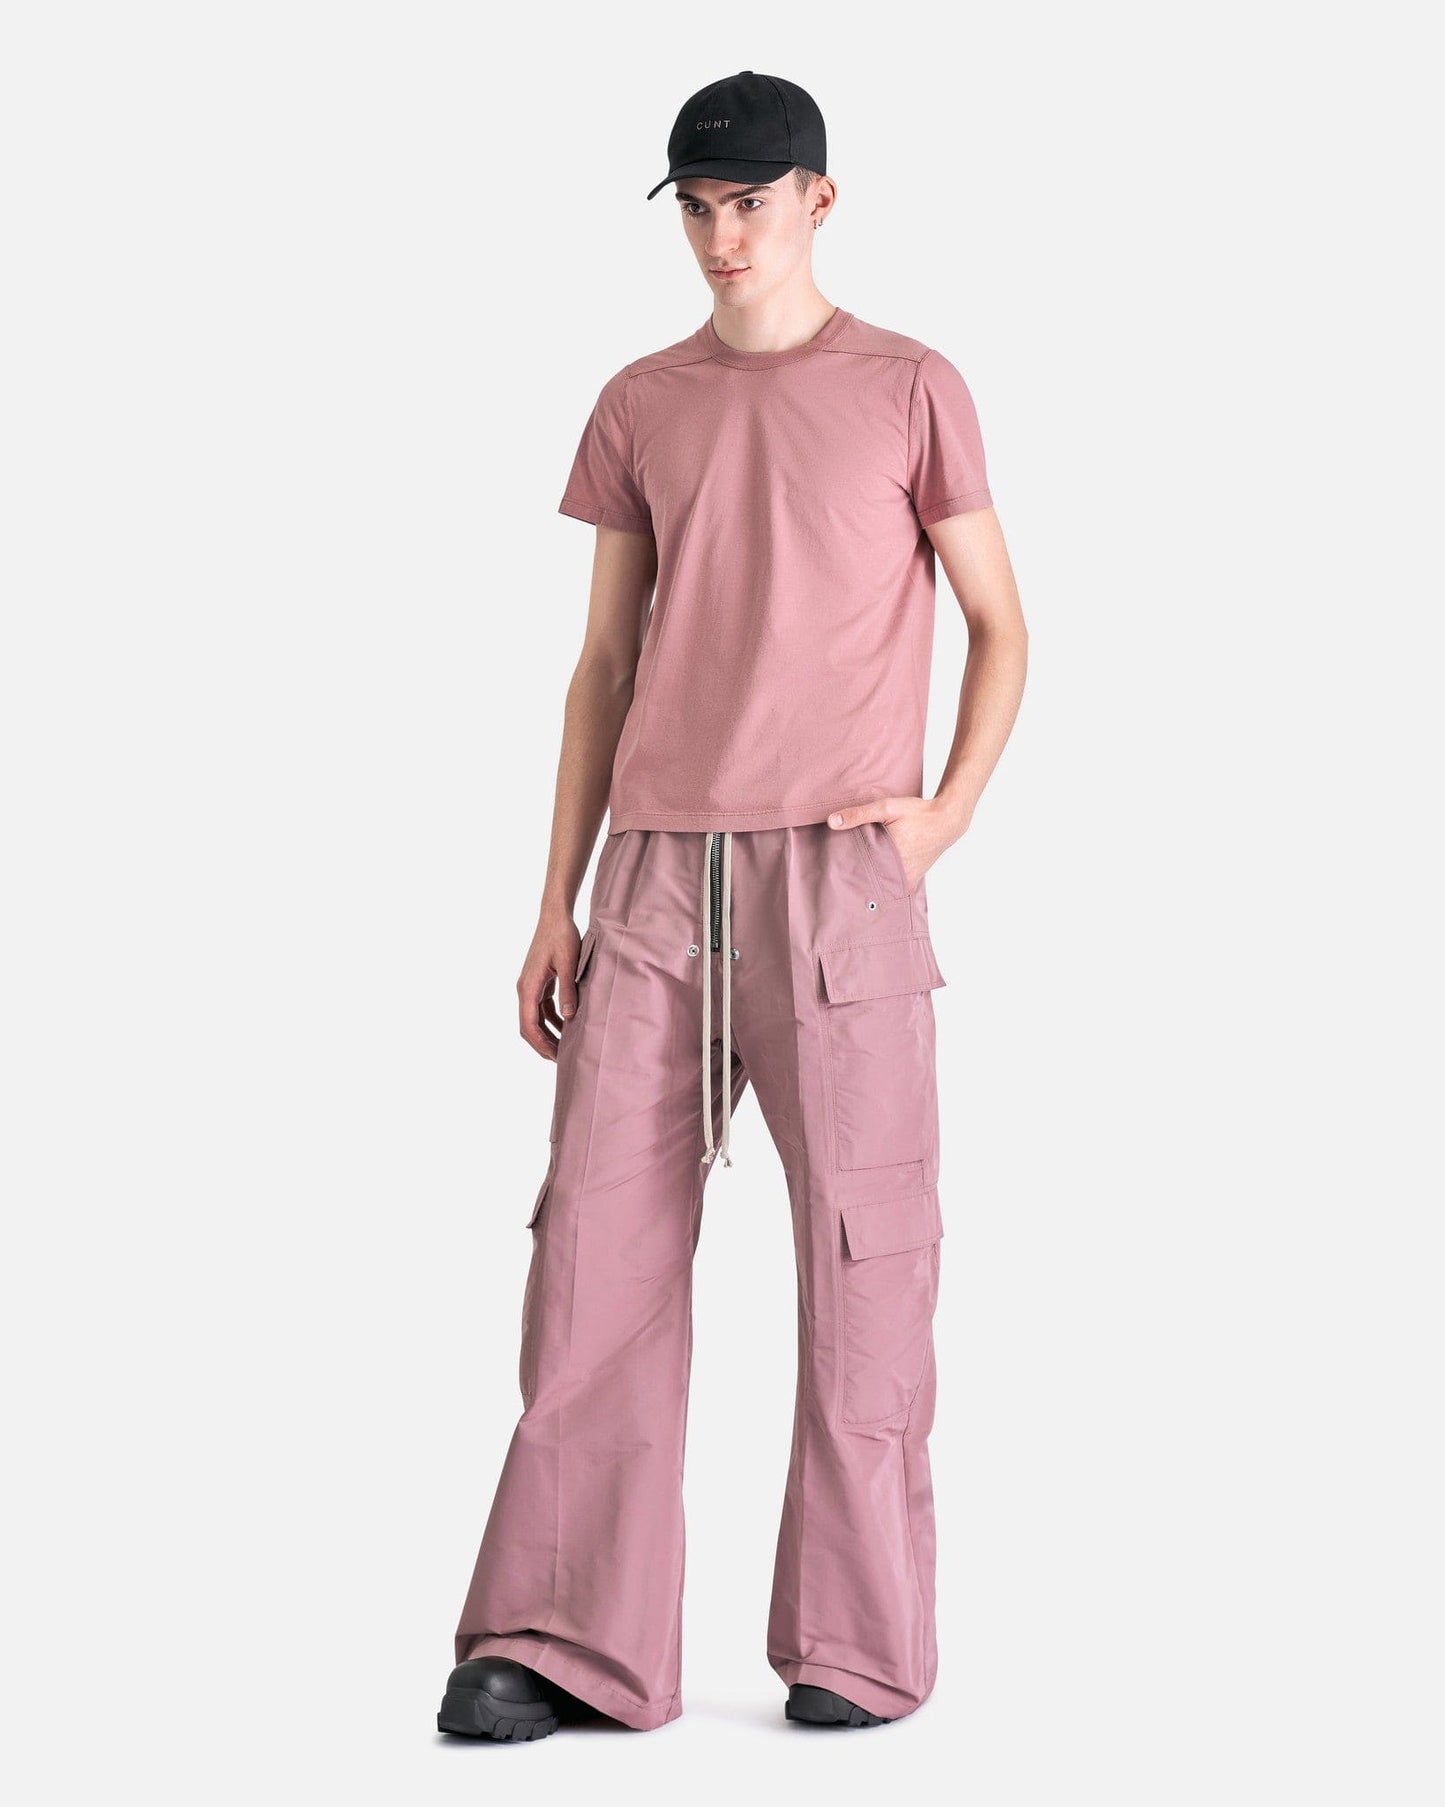 Rick Owens Men's T-Shirts Short Level T-Shirt in Dusty Pink